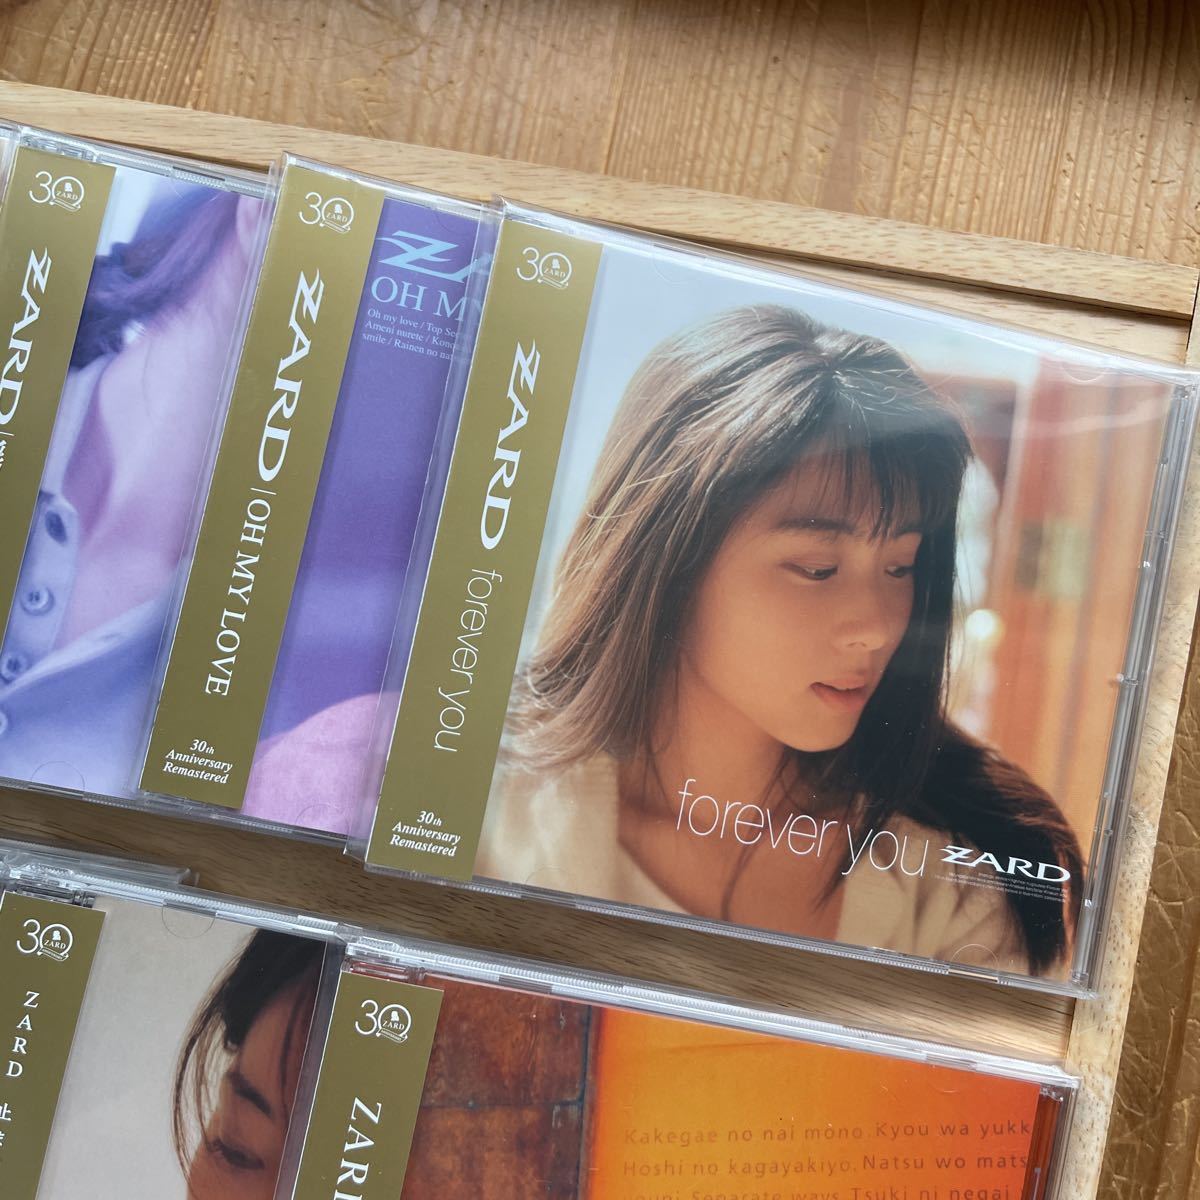 ZARD 30th anniversary remastered 全11枚セット 初回特典付き くらし 